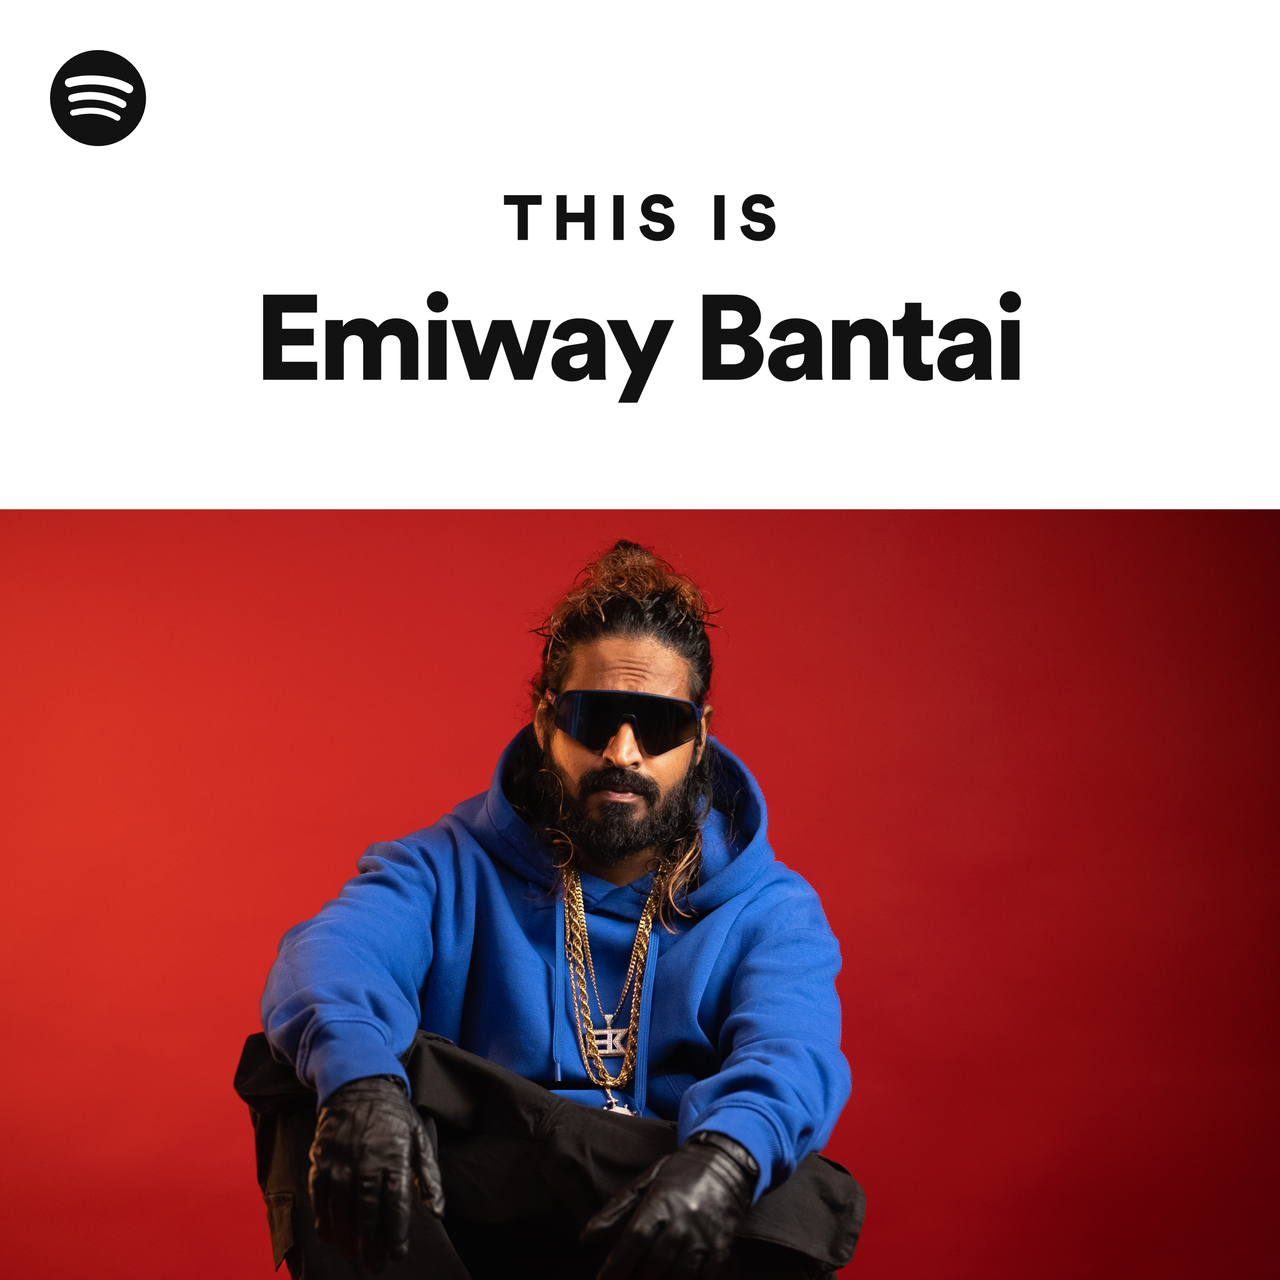 This Is Emiway Bantai - playlist by Spotify | Spotify